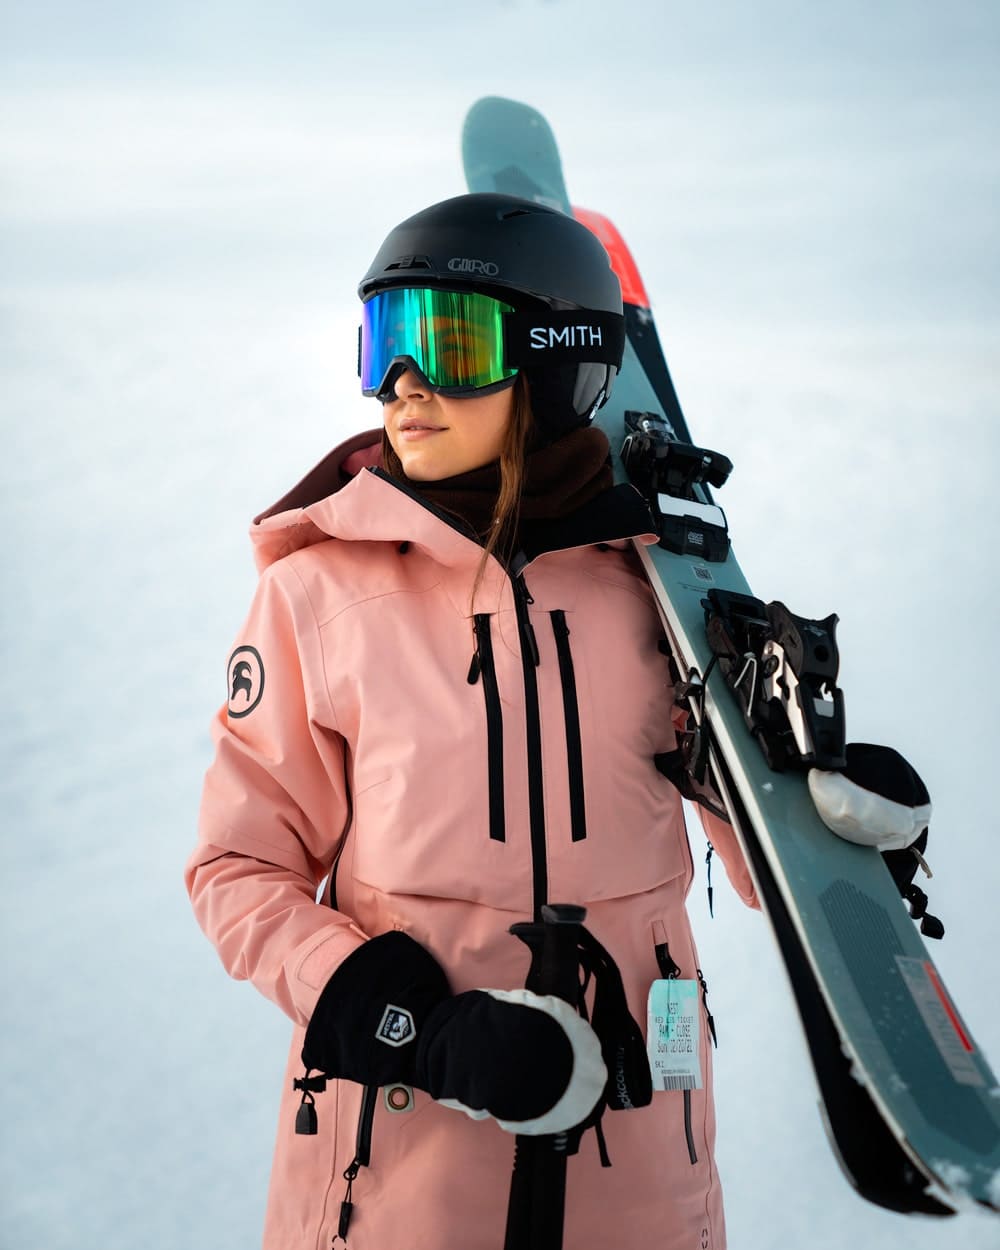 Beginner's Guide to Skiing: Learning to Ski as an Adult - Renee Roaming